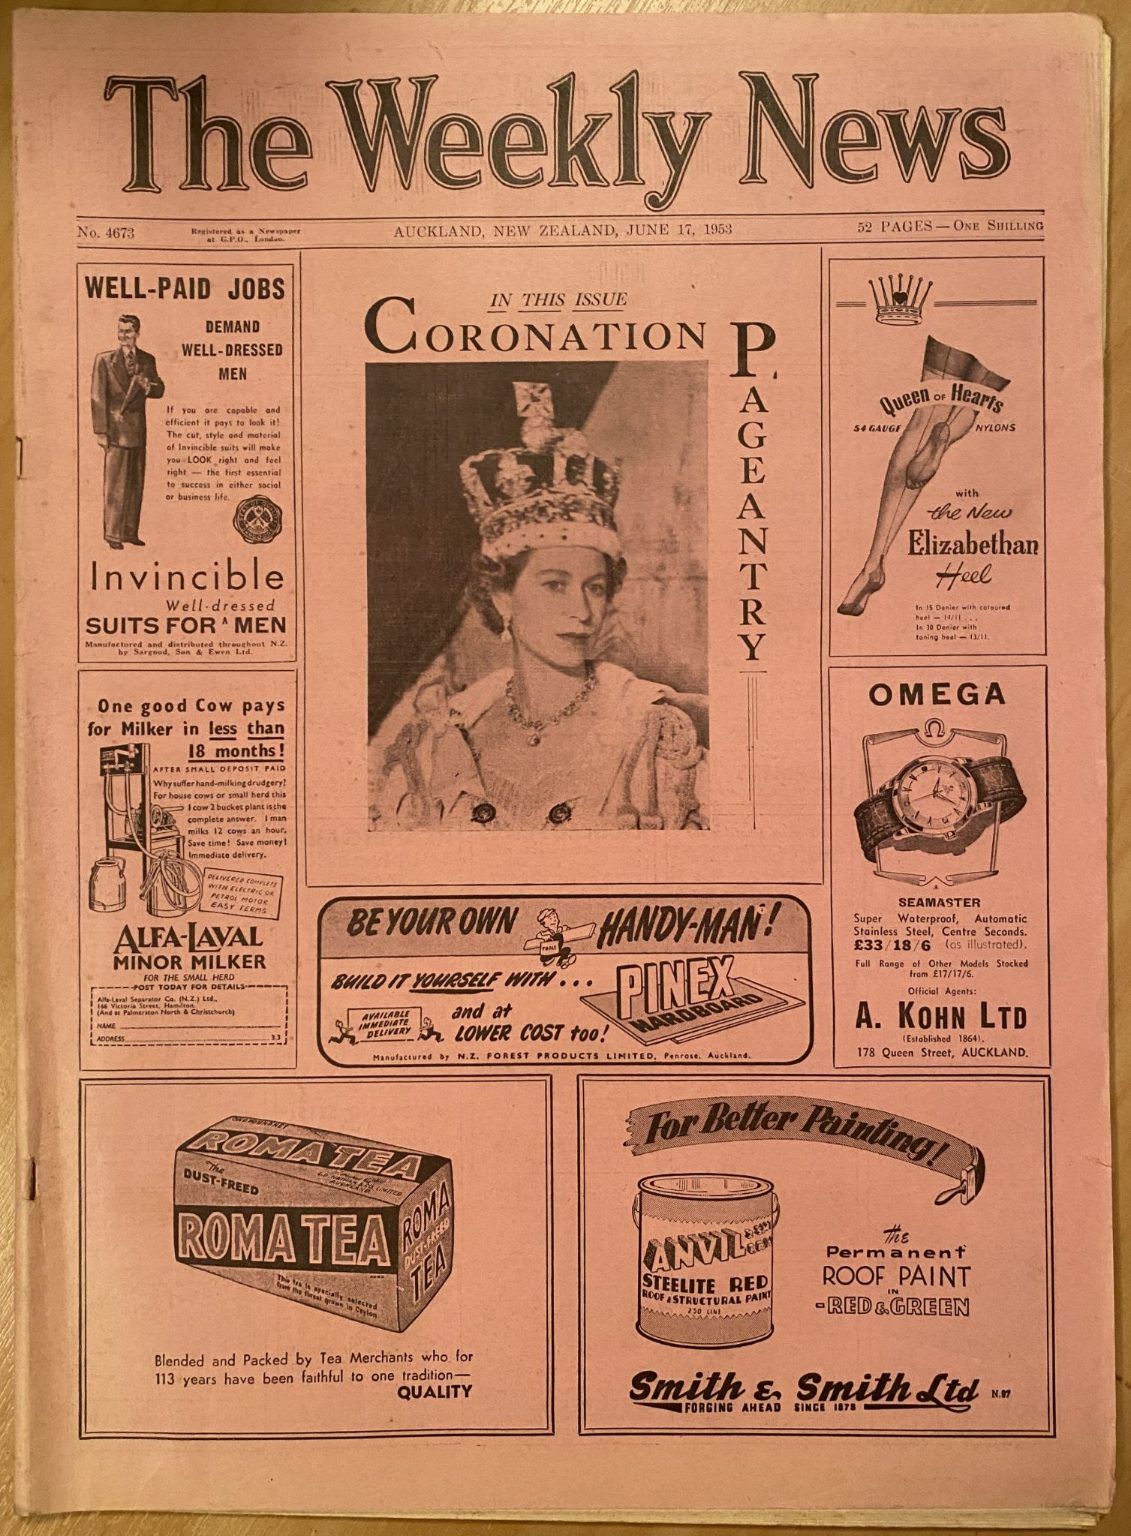 OLD NEWSPAPER: The Weekly News - No. 4673, 17 June 1953